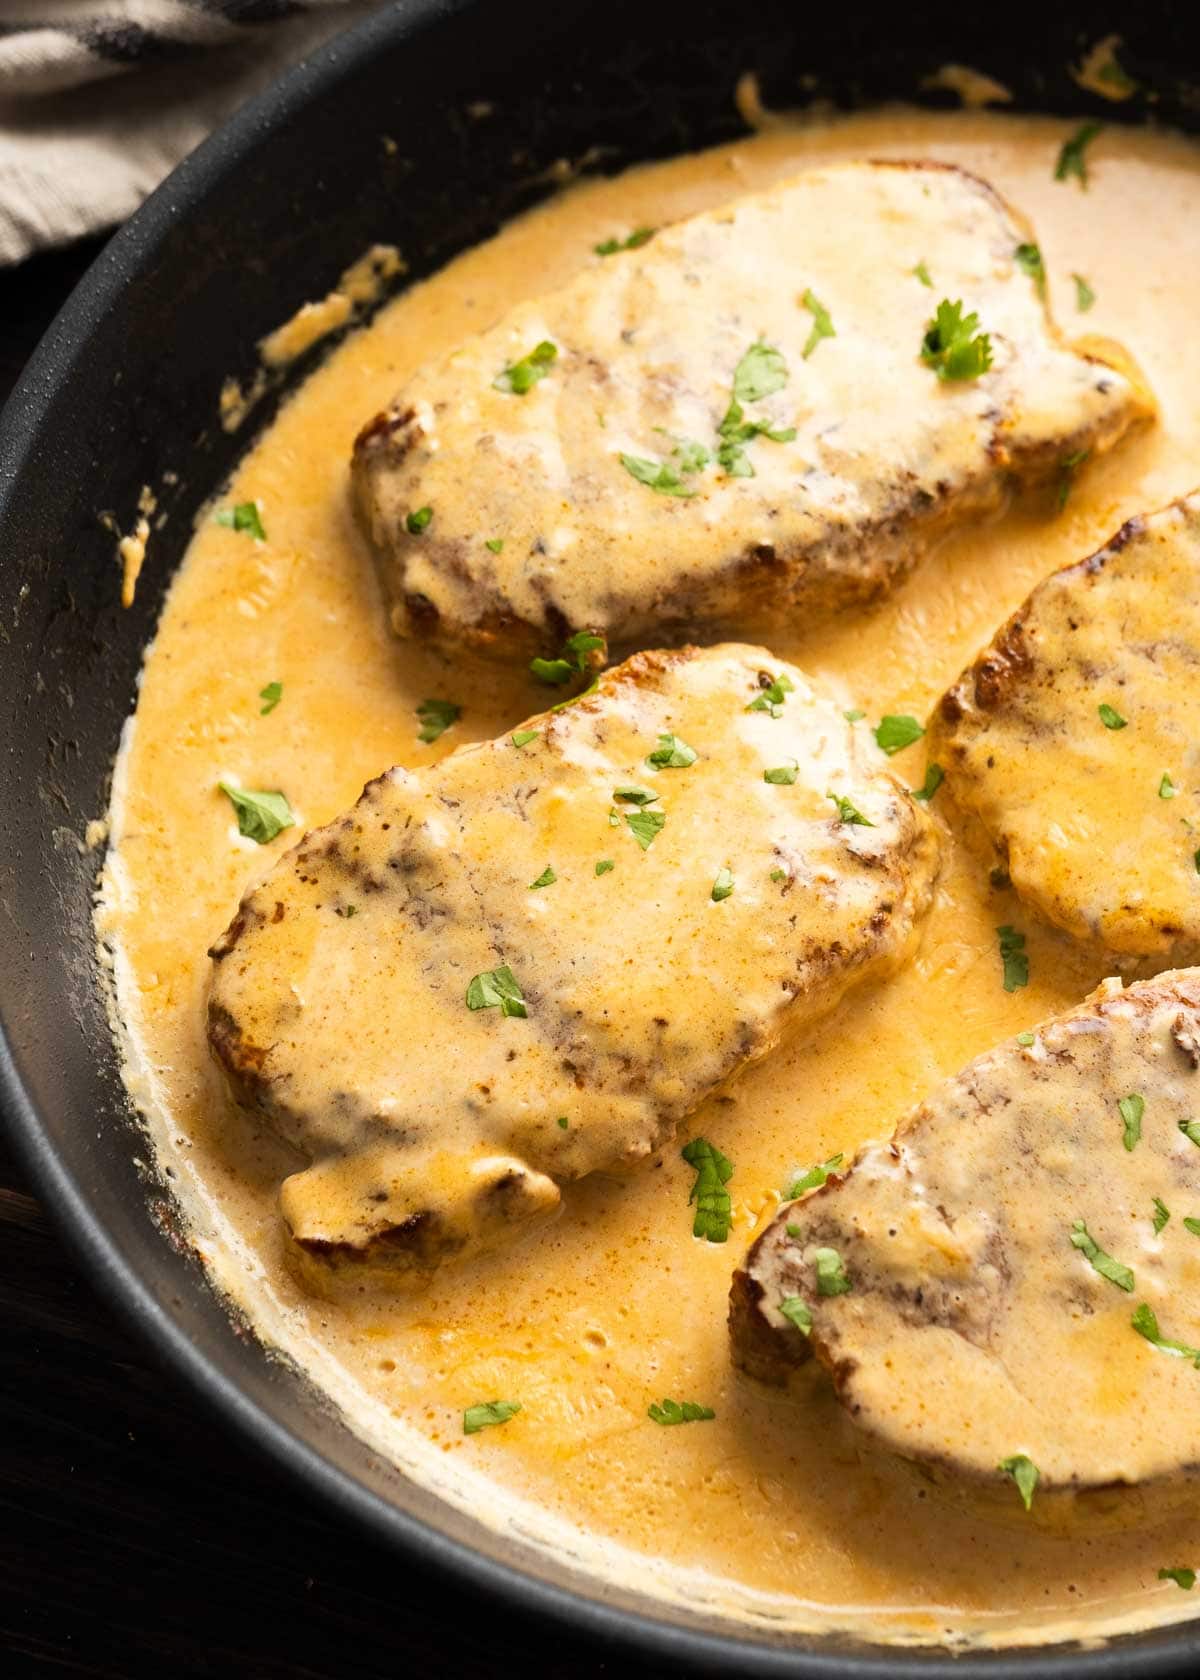 large skillet full of creamy cajun sauce and thick cut pork chops